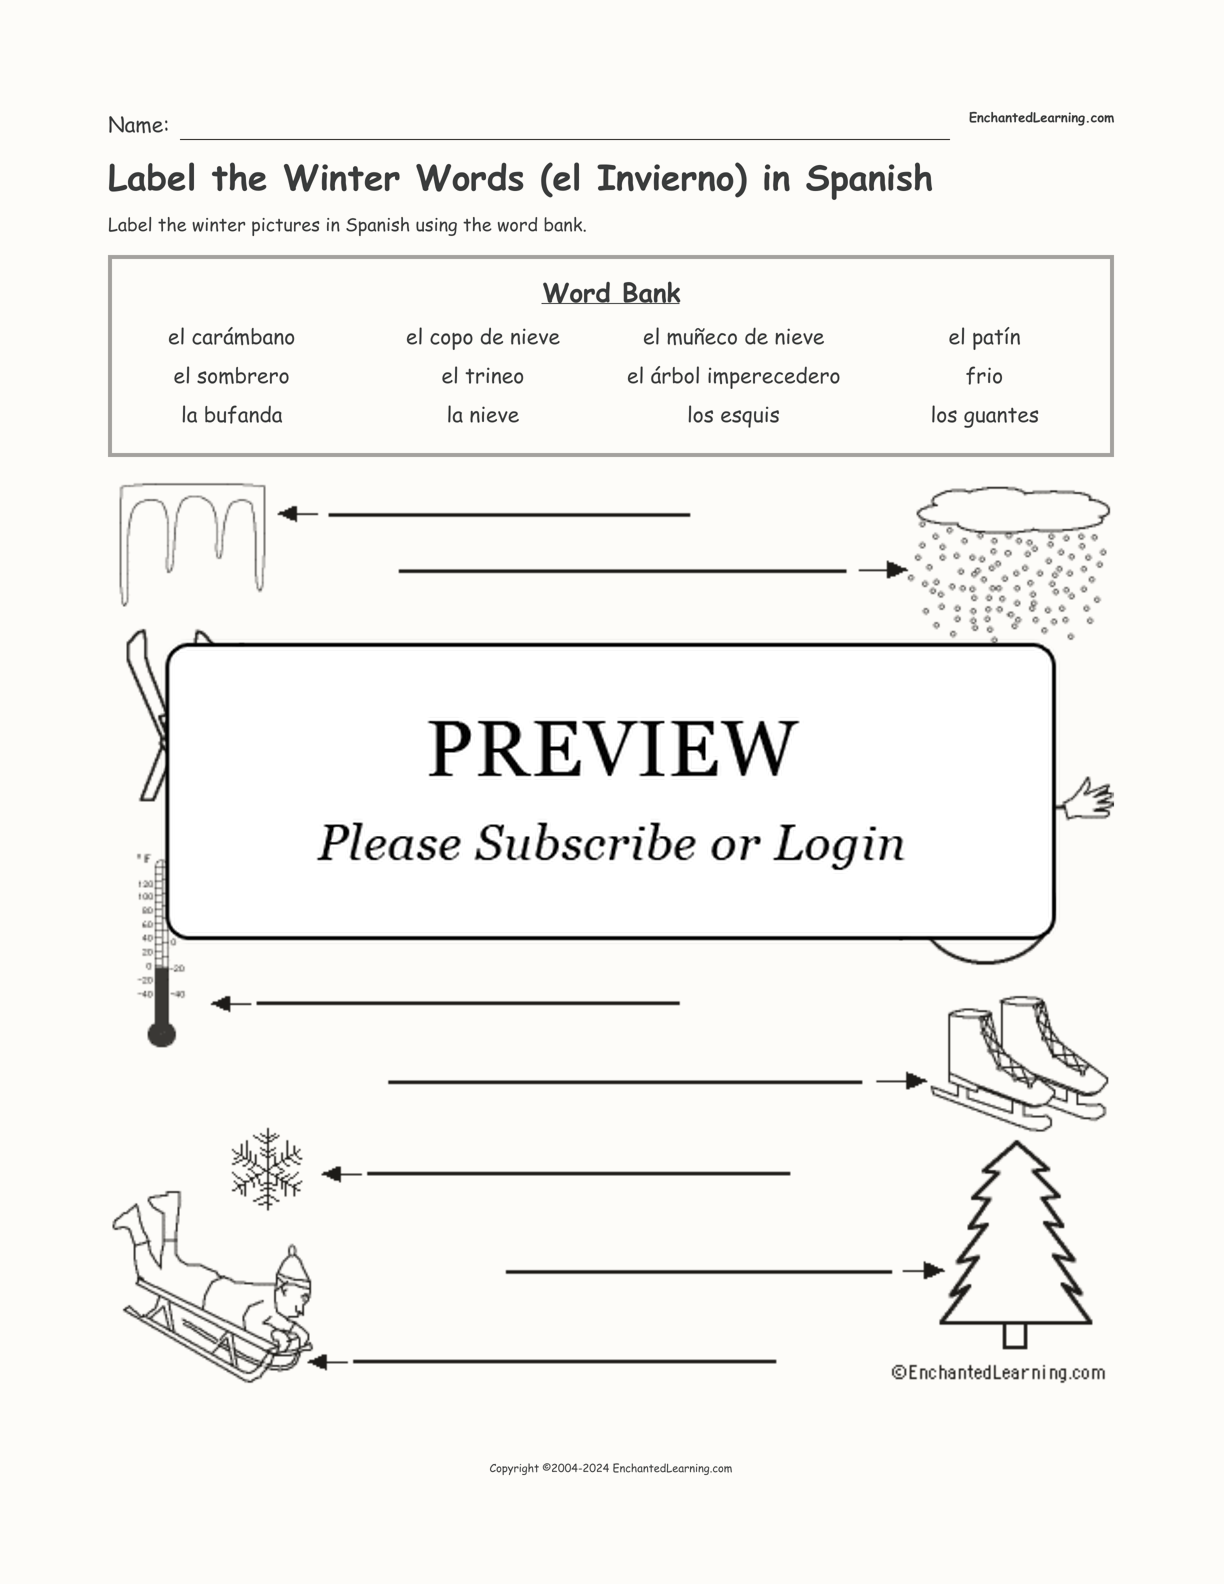 Label the Winter Words (el Invierno) in Spanish interactive worksheet page 1